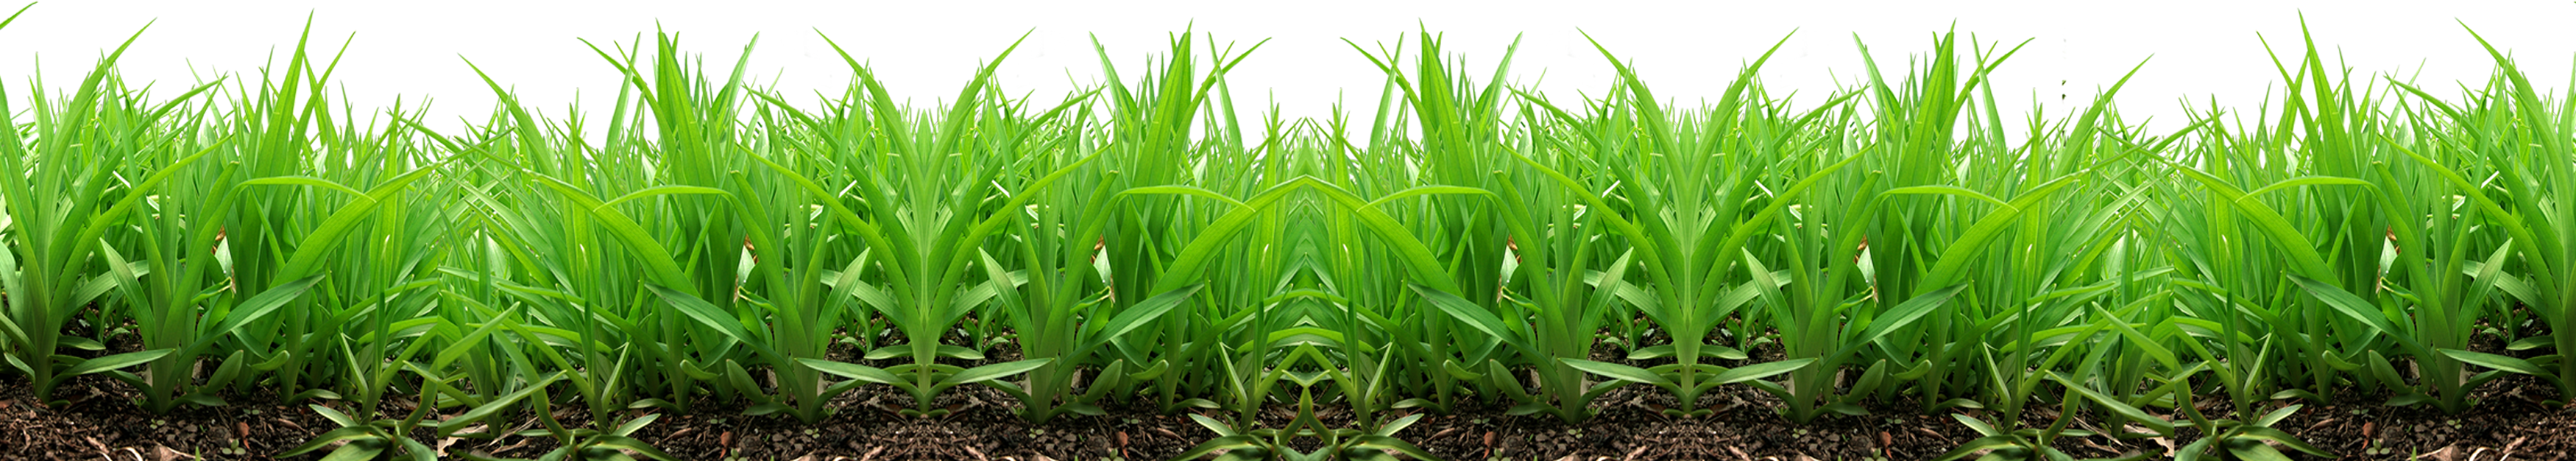 Grass Png Image, Green Grass Png Picture - Grass Png For Picsart (3500x626)